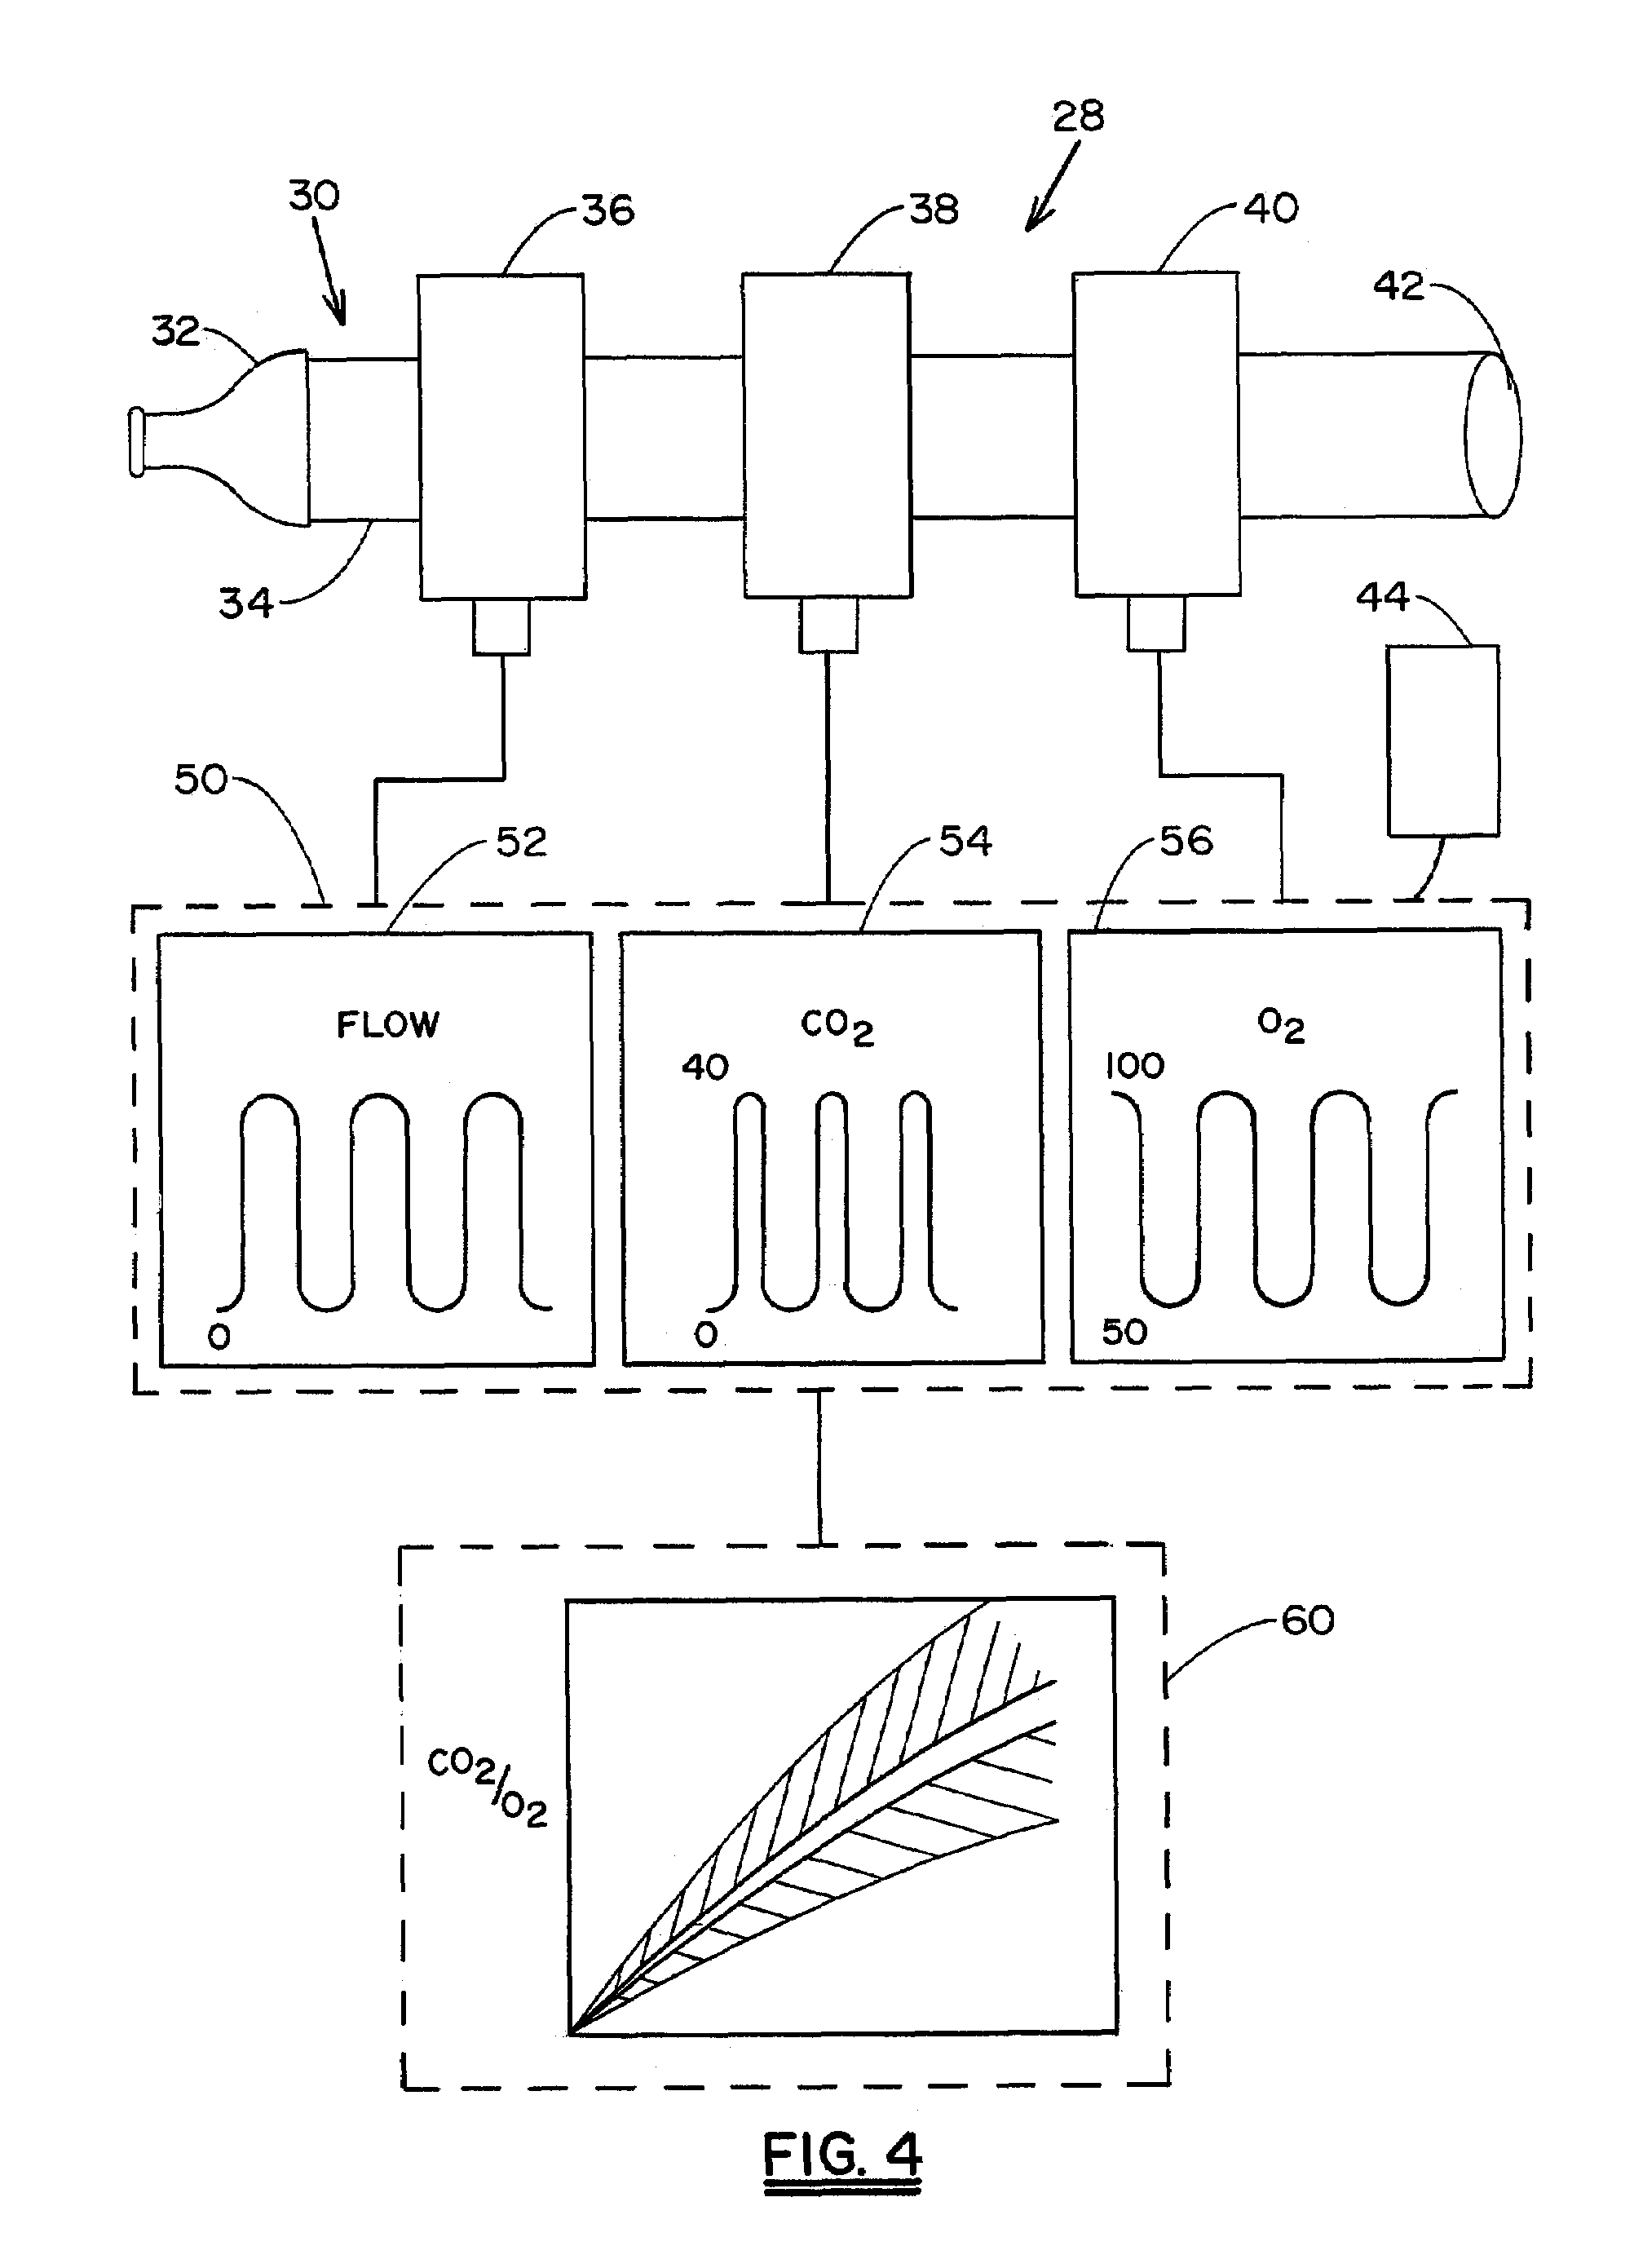 Non-invasive device and method for measuring the cardiac output of a patient